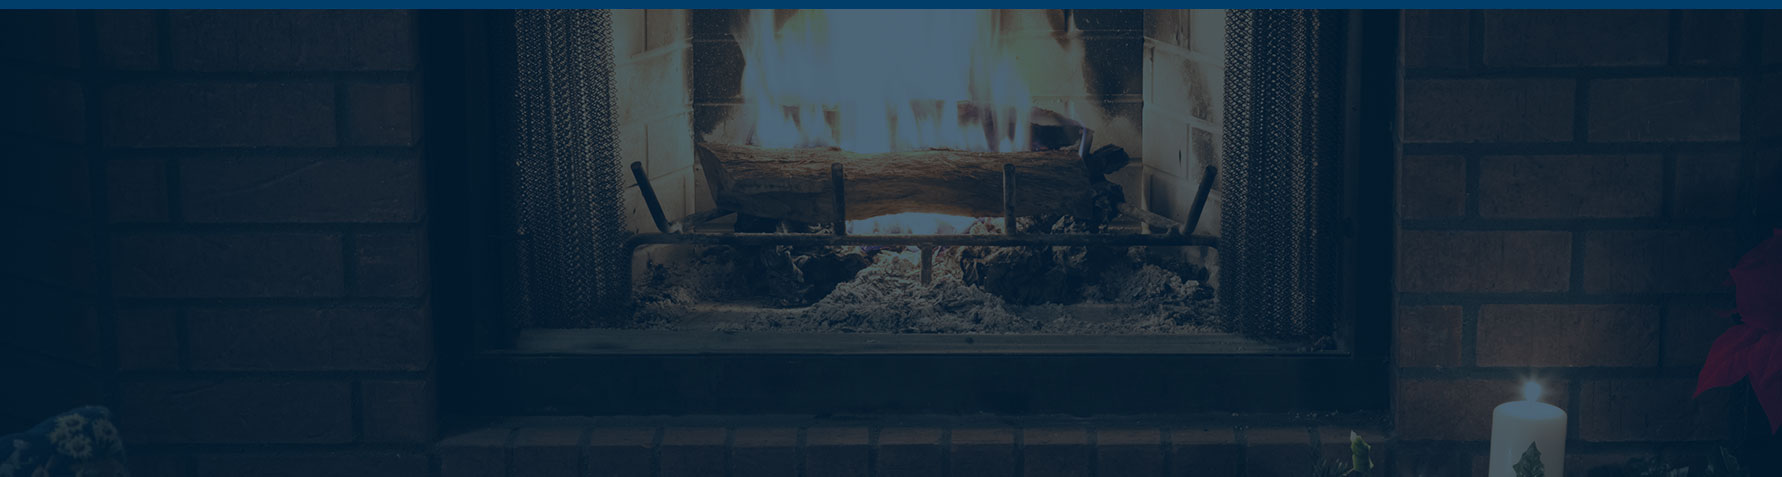 Visit our member directory for fireplace manufacturers.